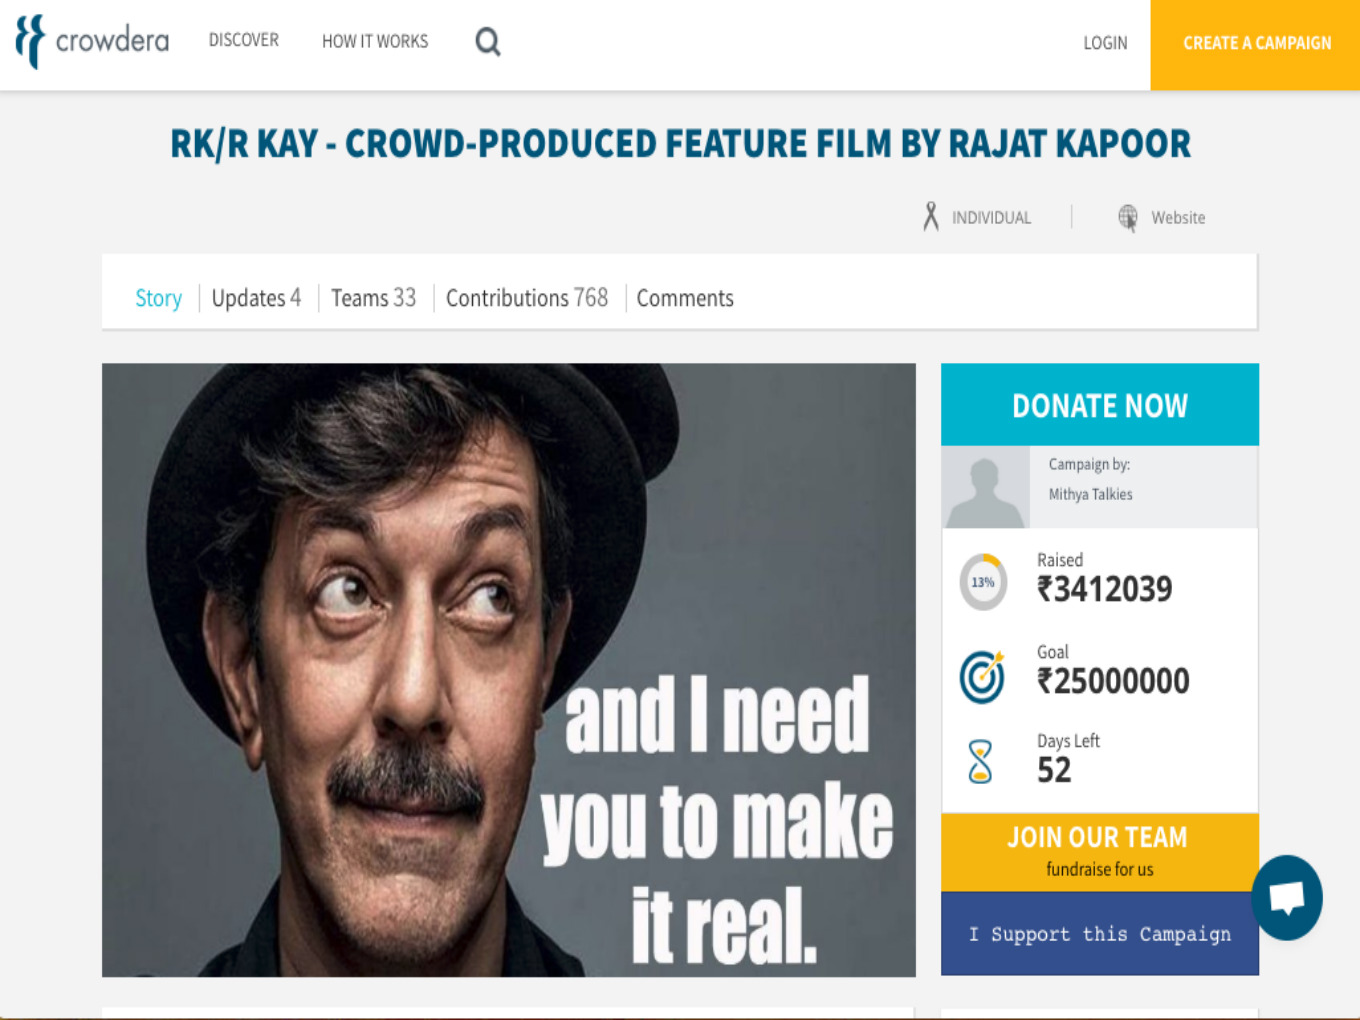 Support FrCrowdera: This Crowdfunding Platform Is Creating A ‘Giving Economy’ By Connecting Do-Gooders With Those In Needom 60 Countries For Humanitarian Calls On Crowdera Since its inception in 2014, Crowdera’s platform-as-a-service (PaaS) solution has helped more than 2,500 crowdfunding campaigns, claims Jain. He adds that the crowdfunding platform is popular in India, the US, the UK, Canada, Guatemala, Singapore, among other 60 countries. Some time ago, storyteller, writer, and humanitarian Laura Simms raised $4.2K on gocrowdera to help a group of adolescent girls in Haiti, who were recuperating from the devastating earthquake. Simms required funds to organise a girls meetup in the Haiti camp to impart awareness on the power of supporting each other by writing poetry and dancing. In her campaign note, she talked about spreading awareness on the risk of diseases and sexual abuse. The campaign that has raised the highest funds so far on the Crowdera platform was launched by Hyderabad-based anti-sex trafficking NGO Prajwala. Its founder — social activist Sunitha Krishnan — raised close to $226K to build a rehabilitation centre for victims of sex trafficking. Crowdera also enables artists and filmmakers to use its platform to raise funds for their projects. Mumbai-based actor and director Rajat Kapoor is crowdfunding for RK/R KAY — a crowd-produced feature film. He has so far raised $48.6K on Crowdera. In another film-making campaign, former Radio Mirchi executive vice-president and radio consultant Riya Mukherjee raised about $27K on Crowdera to produce a short film — The Disguise, which is based on cultural intolerance and racism.